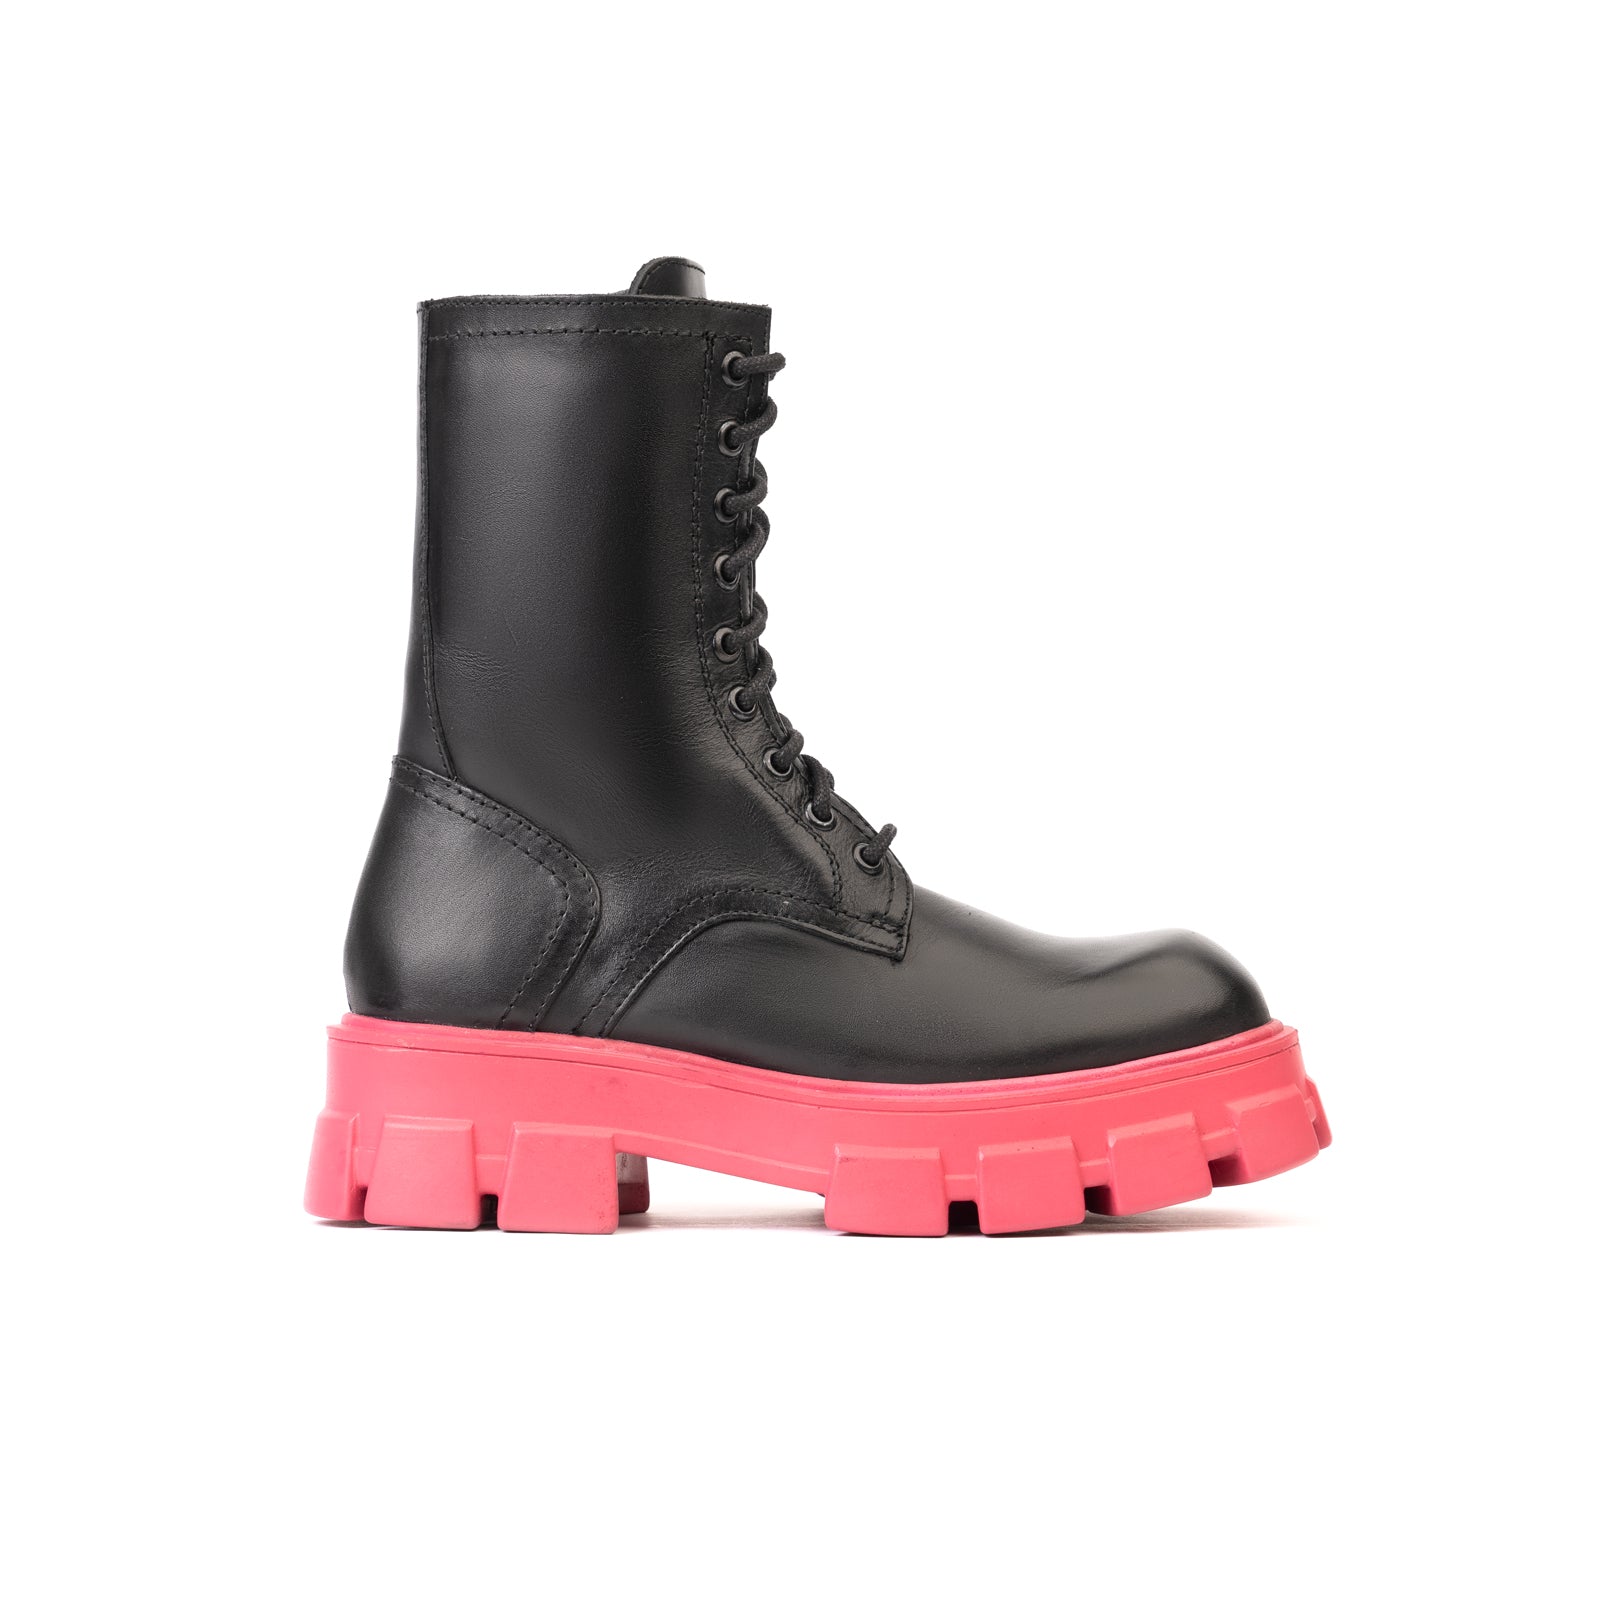 Teresia Combat Boots with Pink Sole